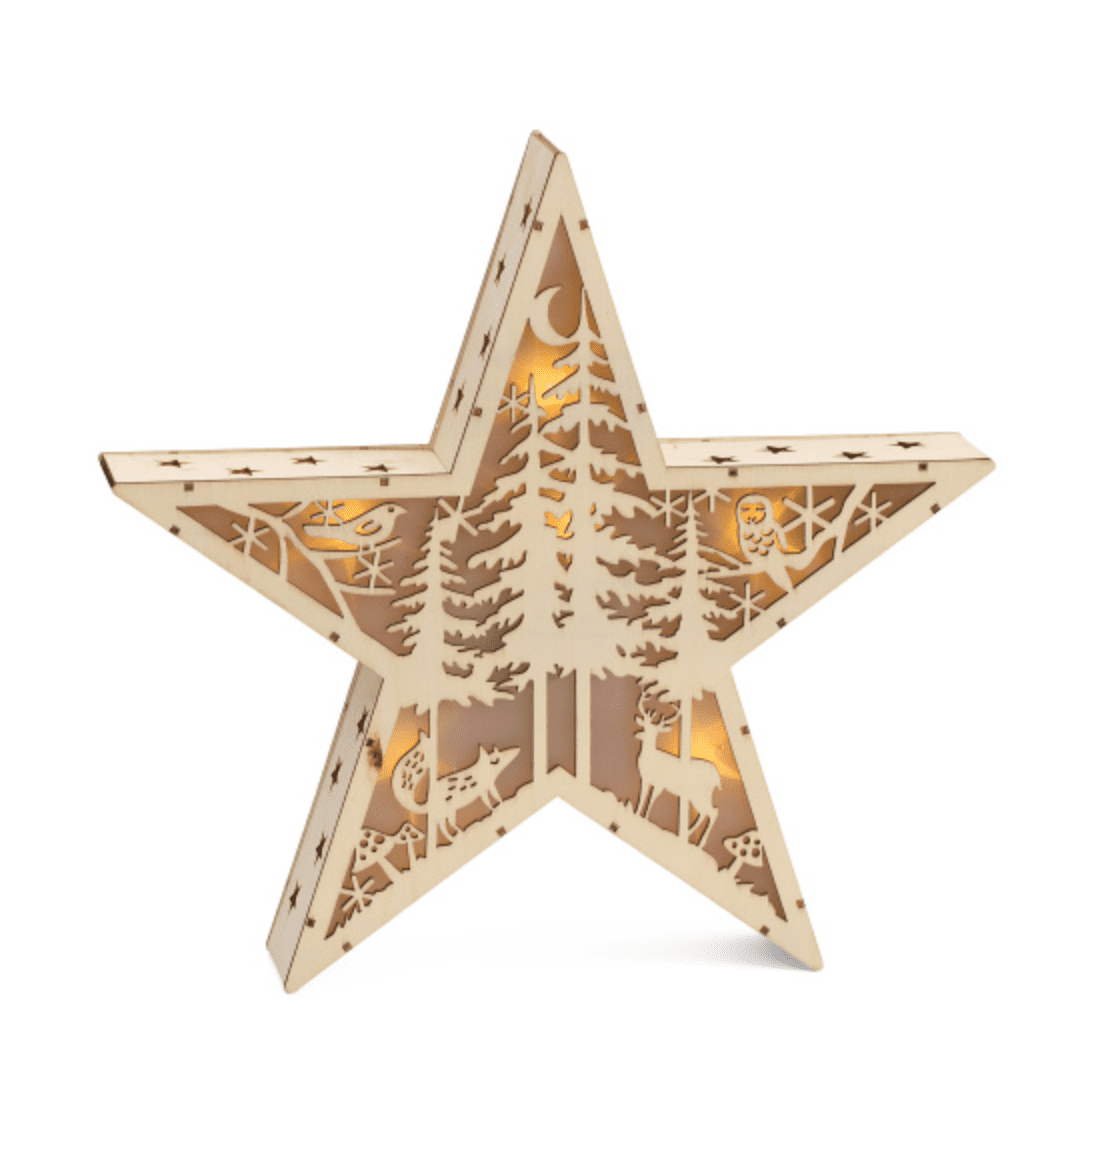 T.J. Maxx's carved wooden decorative star with lighting against a blank white background